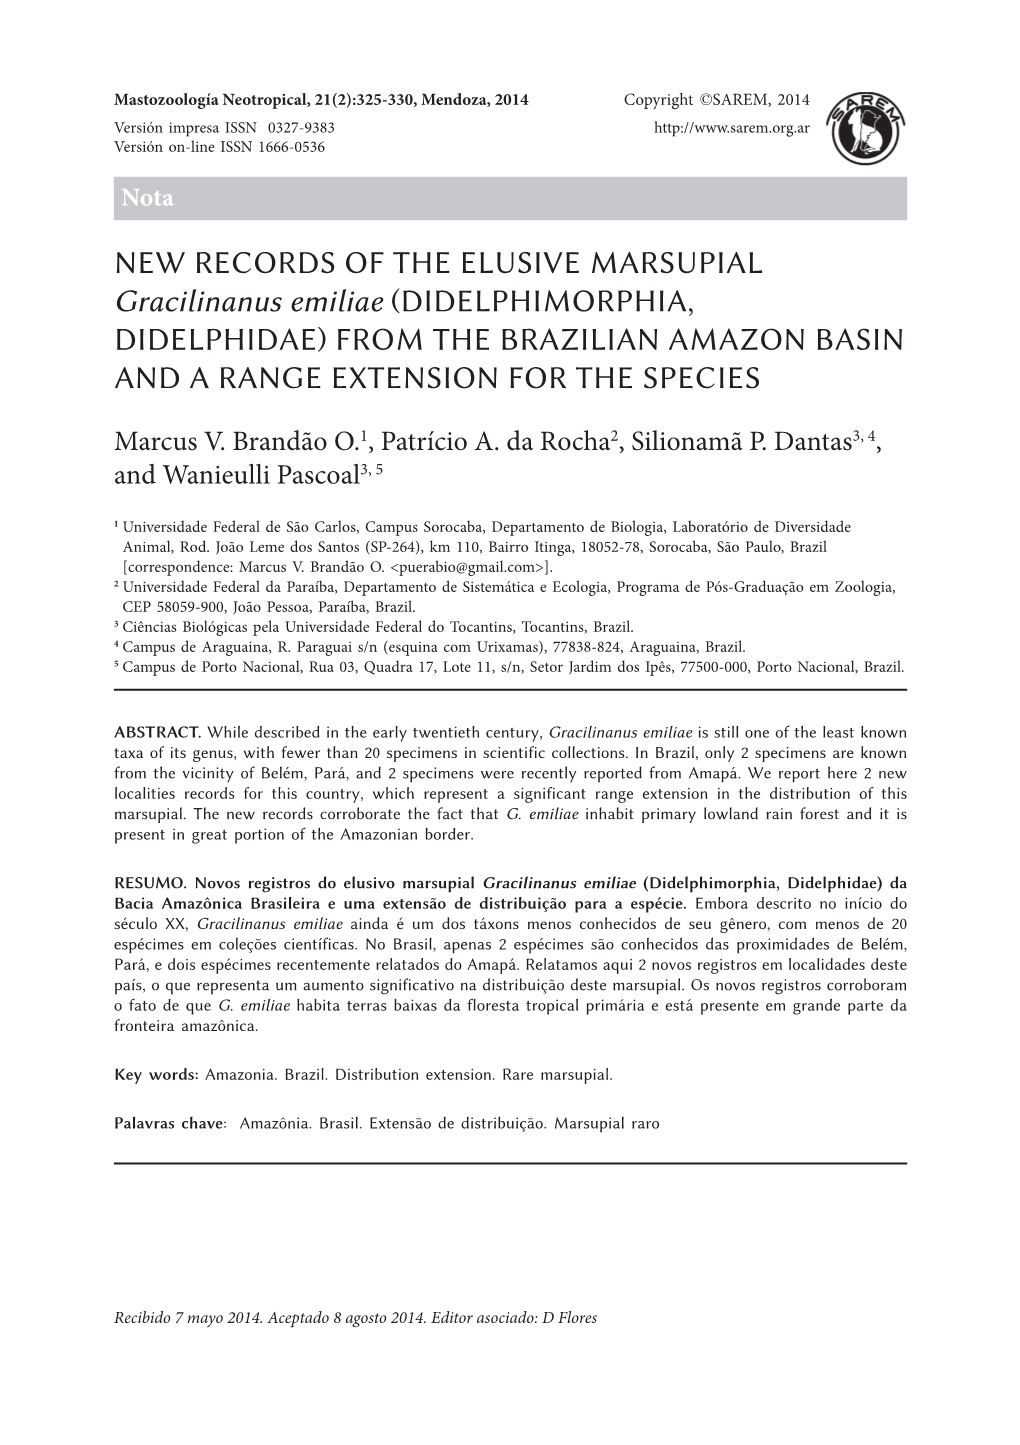 NEW RECORDS of the ELUSIVE MARSUPIAL Gracilinanus Emiliae (DIDELPHIMORPHIA, DIDELPHIDAE) from the BRAZILIAN AMAZON BASIN and a RANGE EXTENSION for the SPECIES